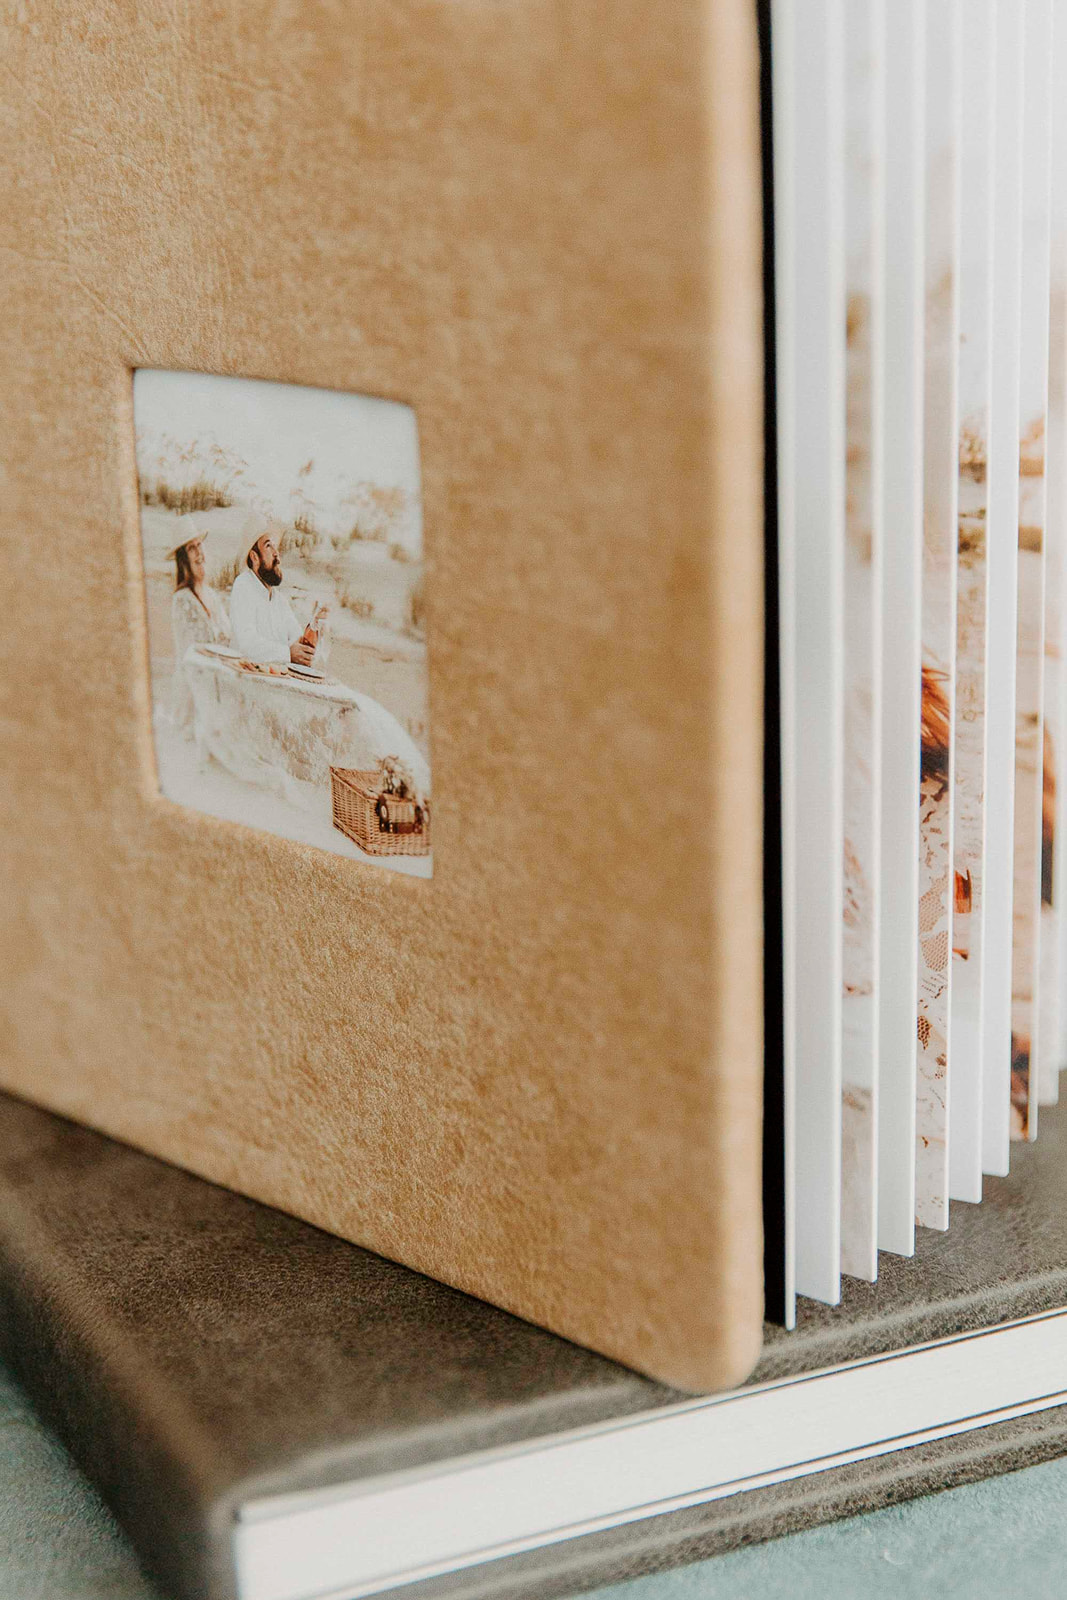 A close-up of a beige wedding photo album with a small picture frame on the cover showing a scenic image, placed on a silver base.